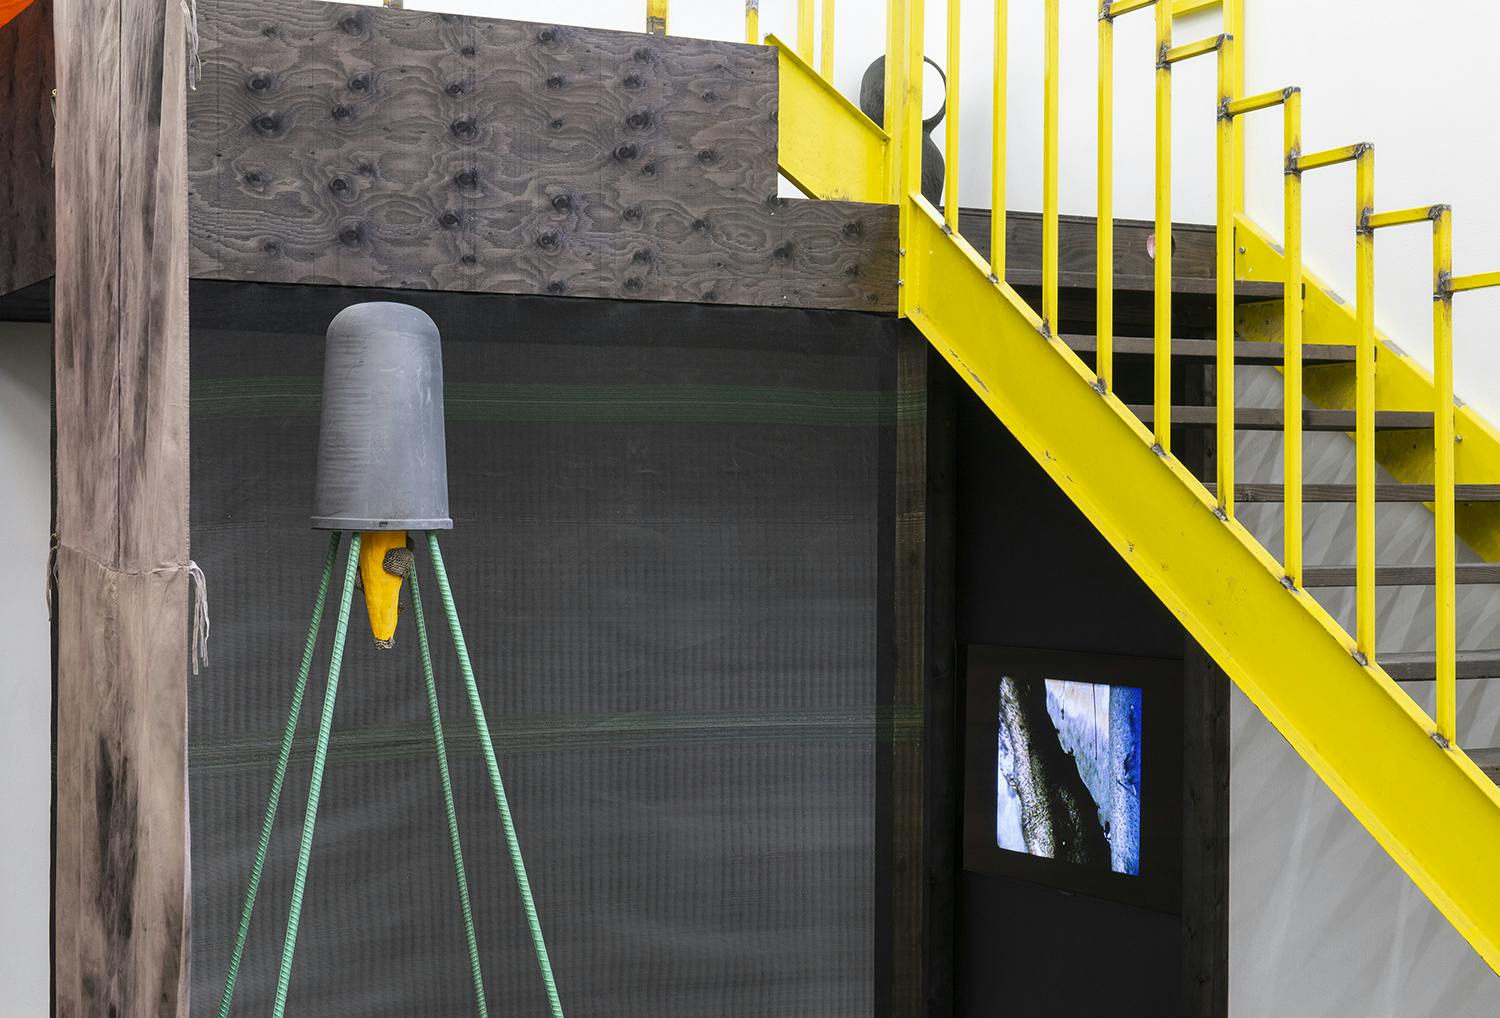 Yellow stairs go up to a platform on the right side of the image. Under the stairs there is a monitor showing an abstract picture. On the left side of the image there is a tall sculpture. 